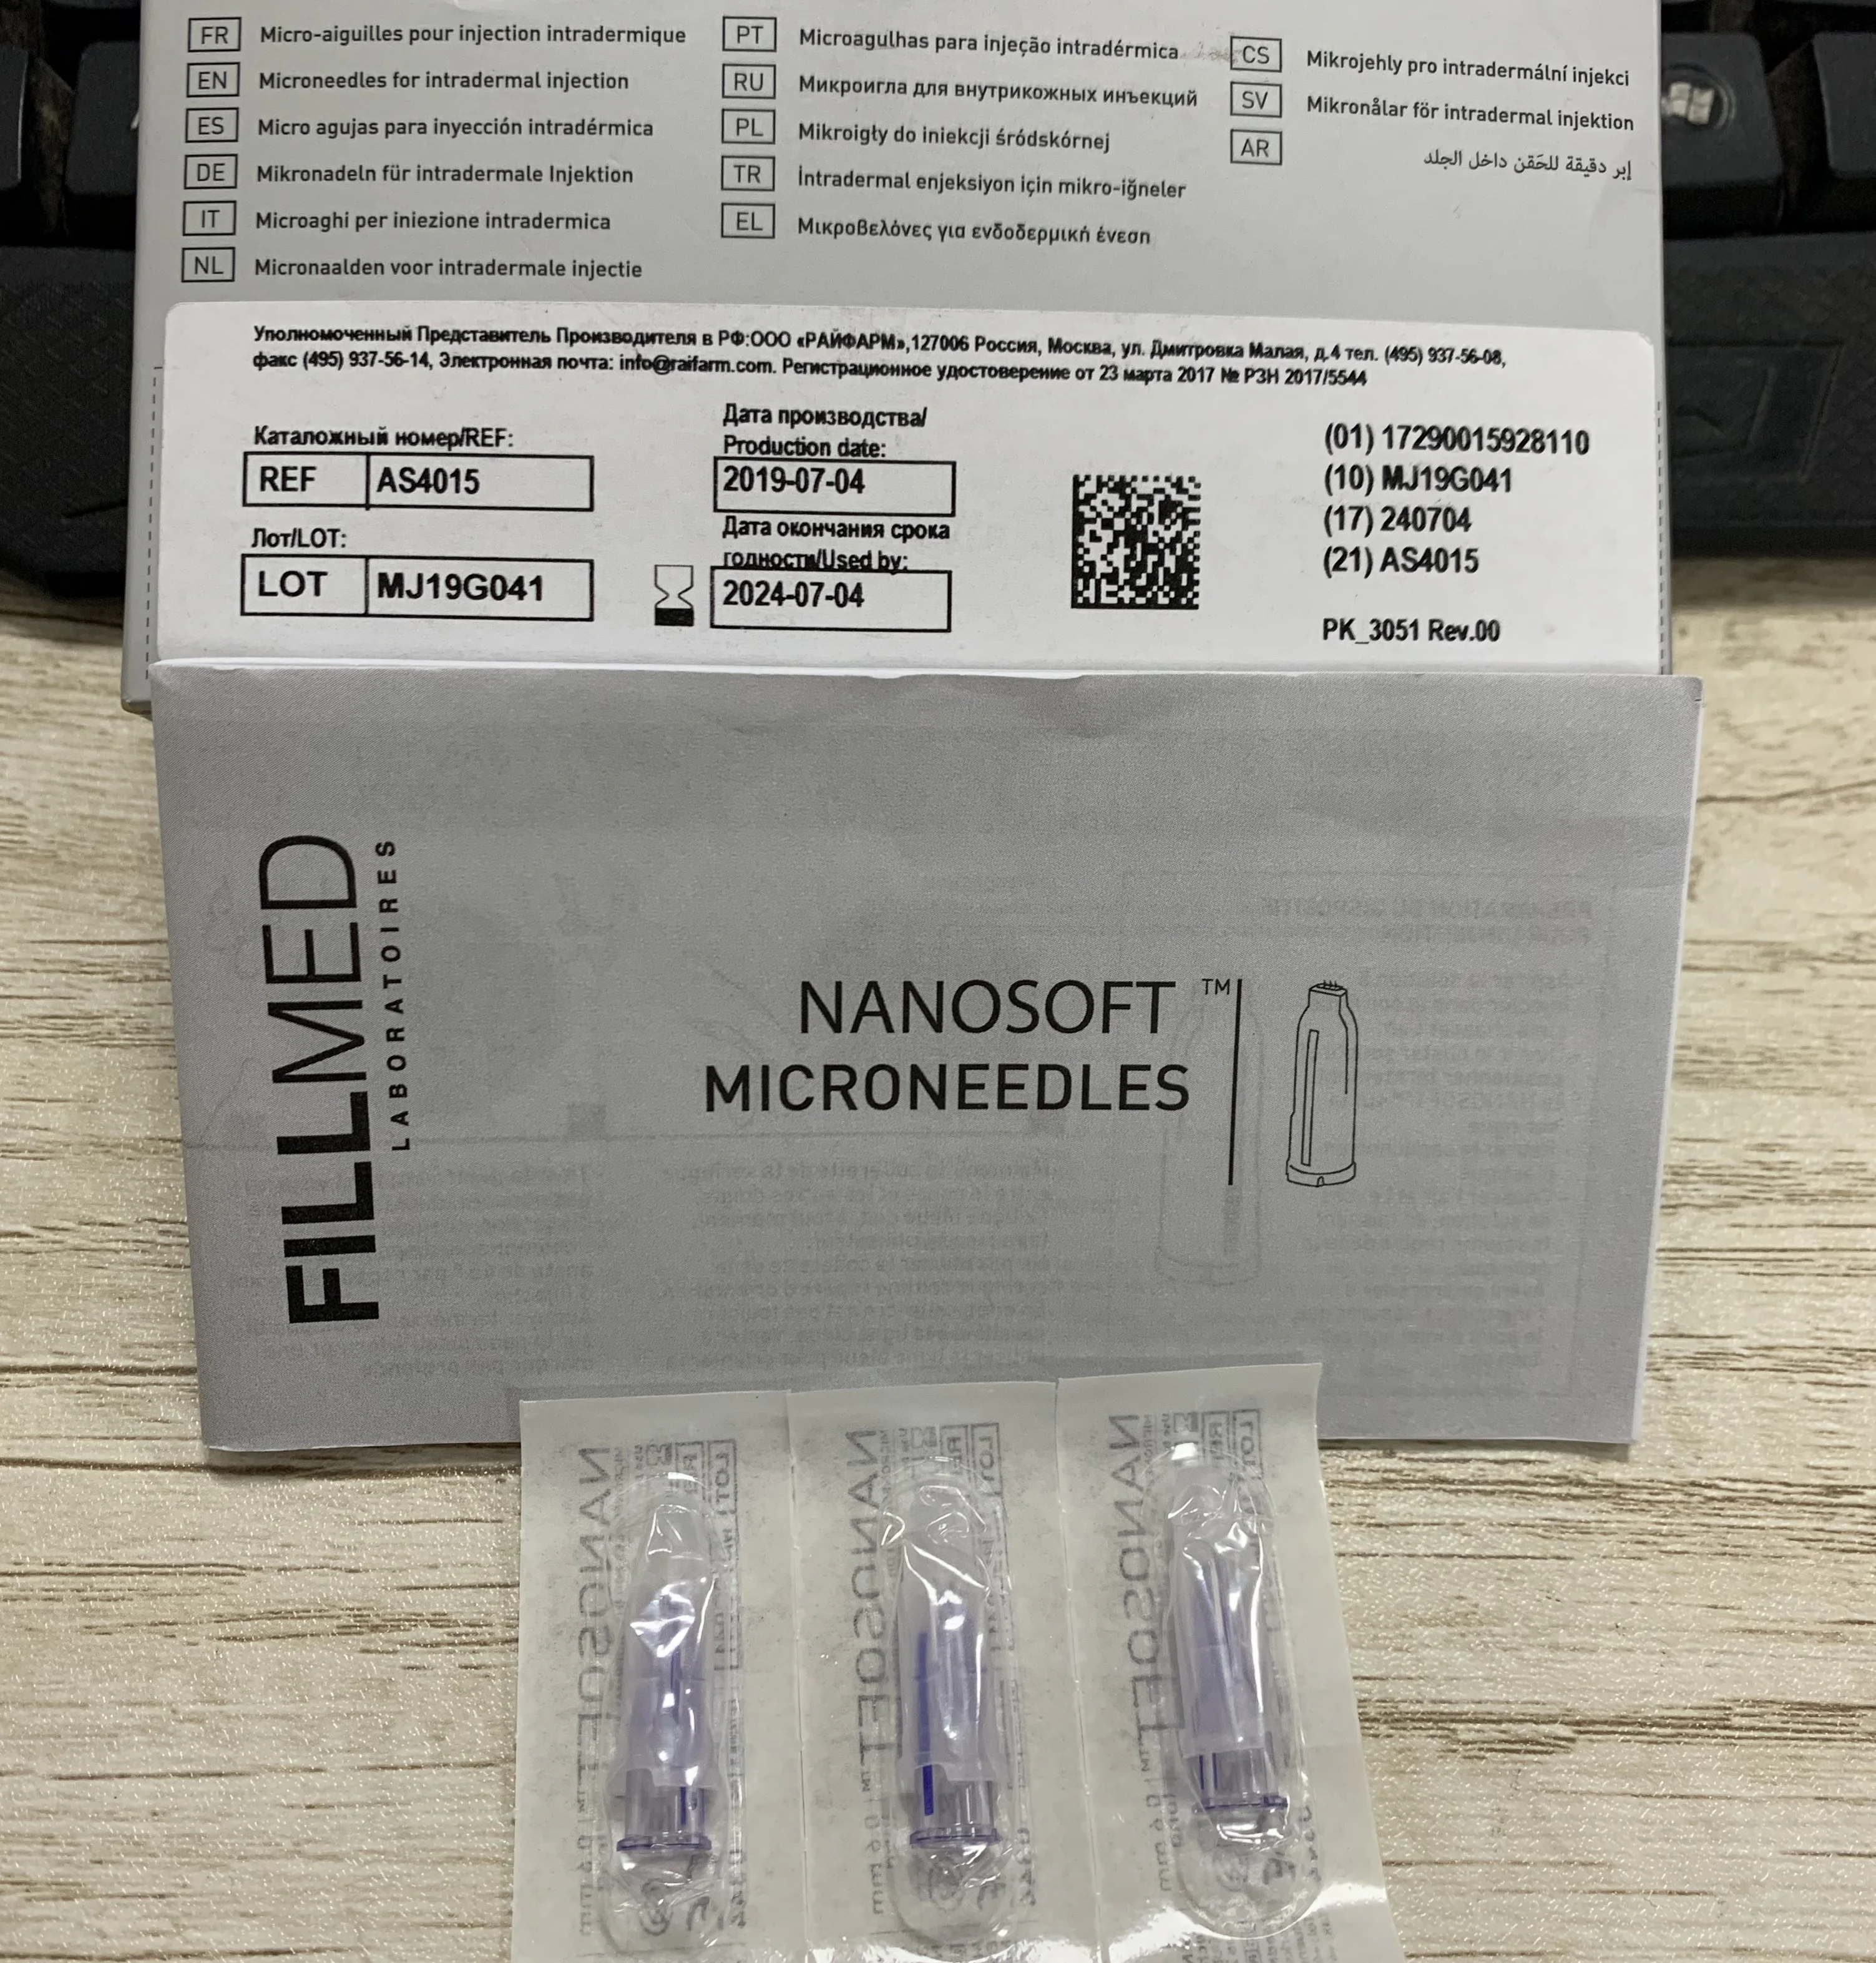 NANOSOFT Microneedle for intradermal injection 0.6mm long